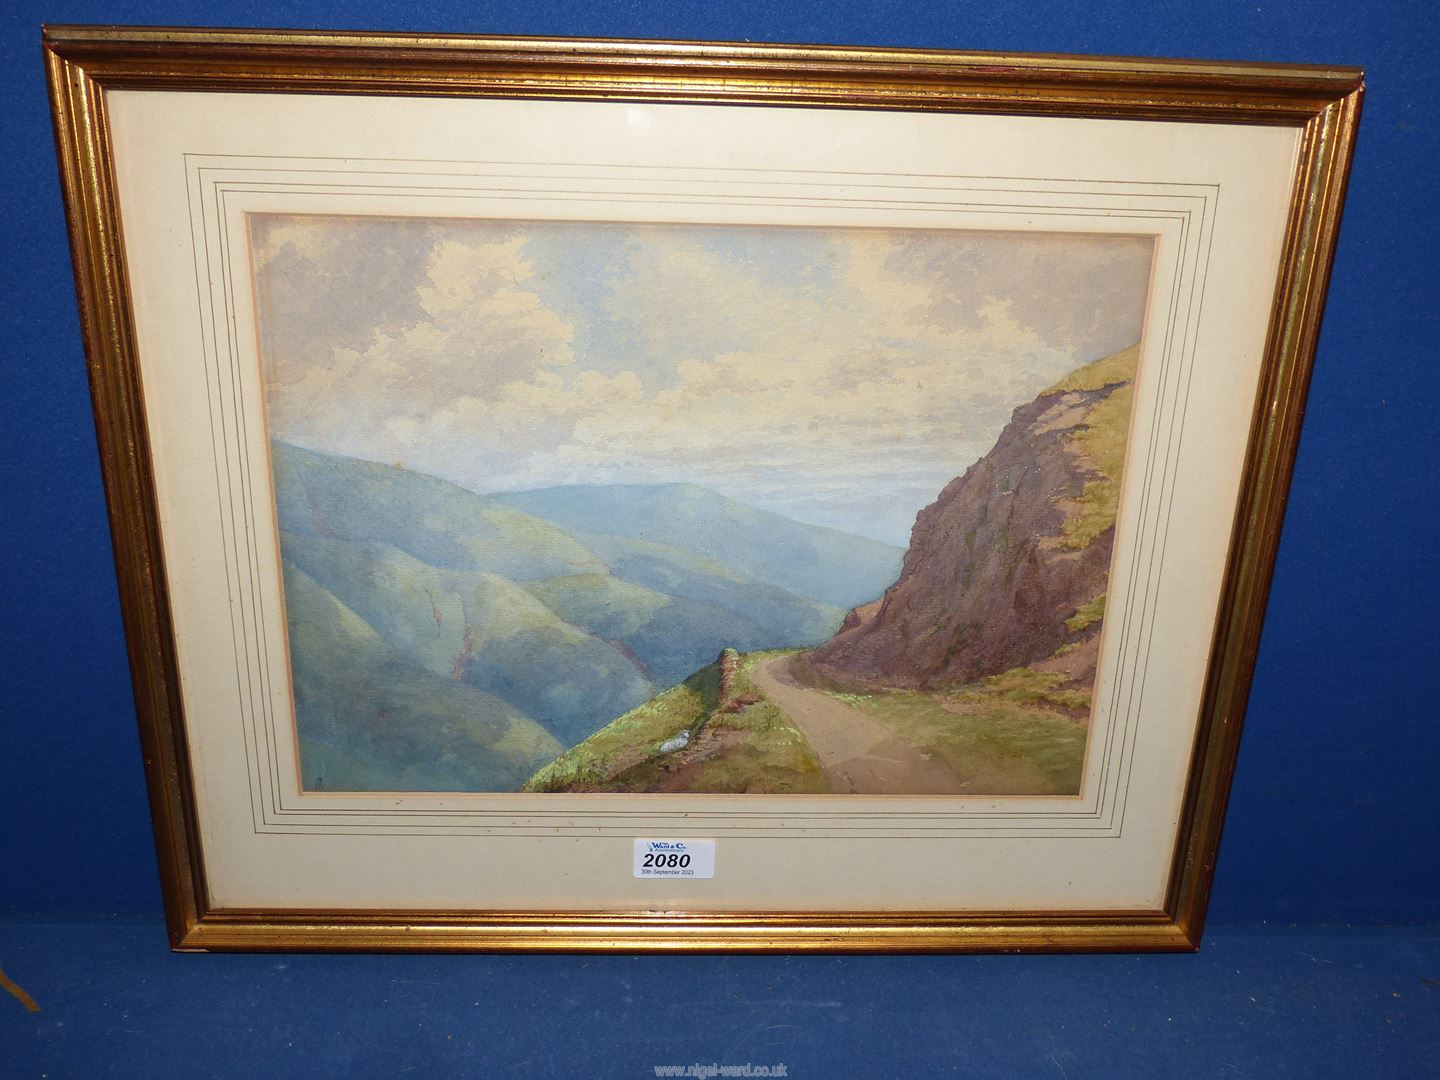 A Watercolour of a mountain overlooking a valley and scenic sky (monogram with I running through A).